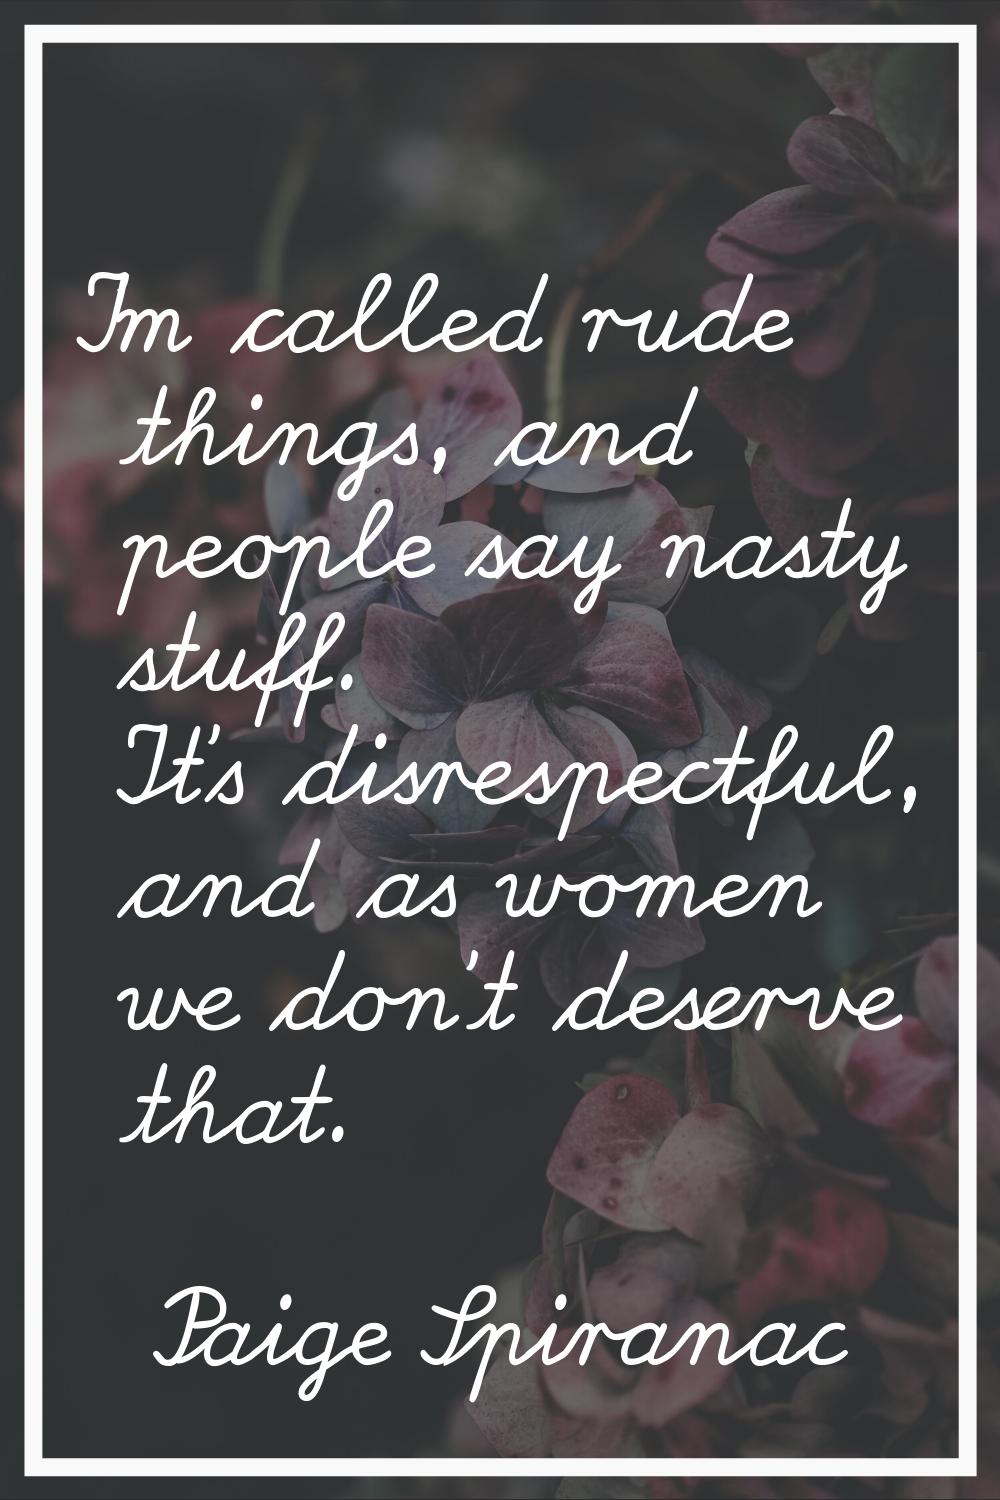 I'm called rude things, and people say nasty stuff. It's disrespectful, and as women we don't deser